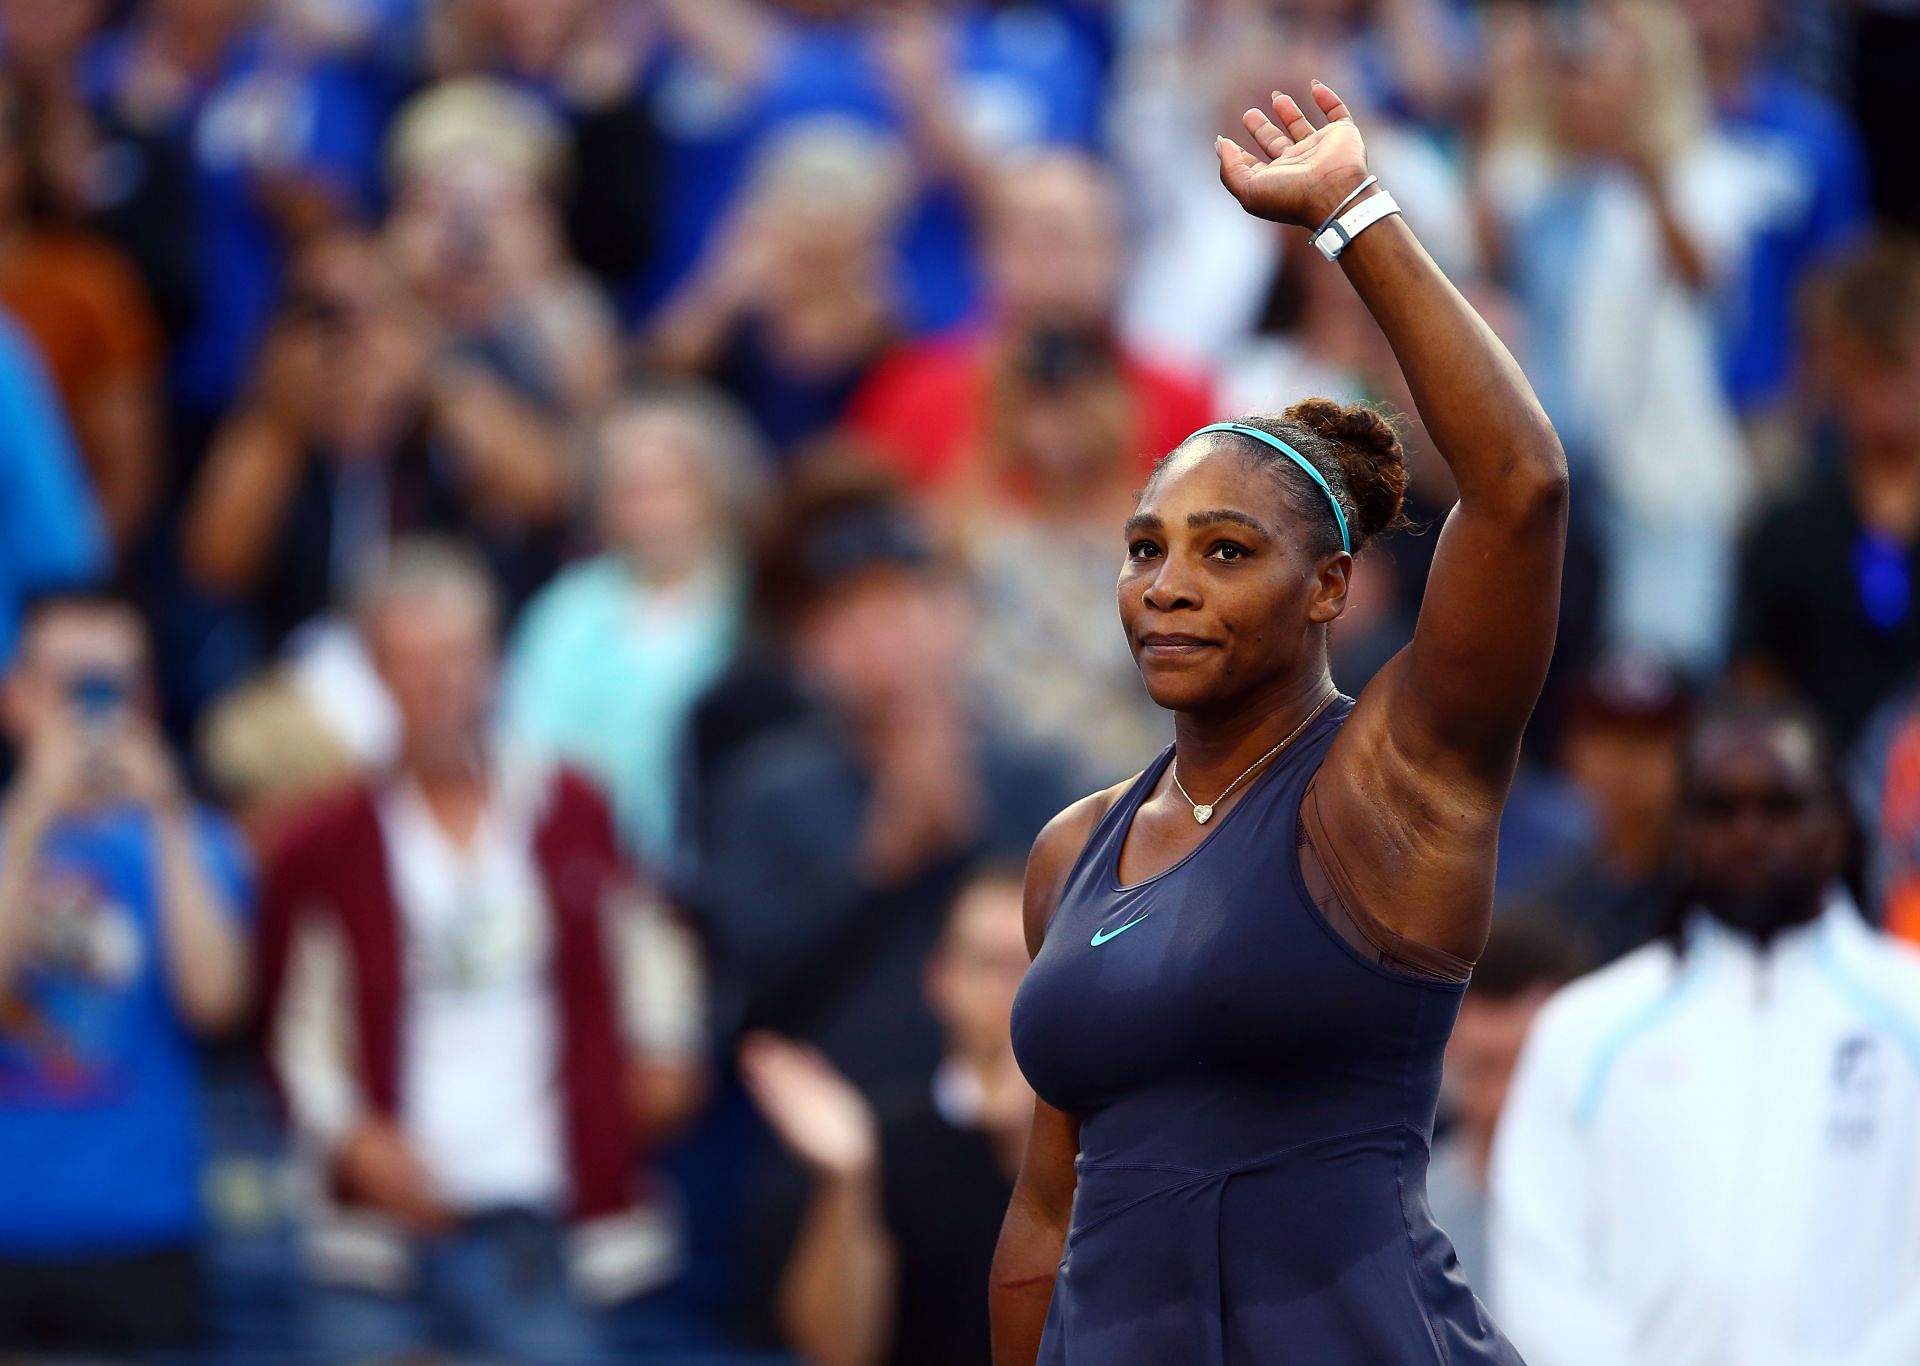 Serena Williams to likely retire after the US Open.